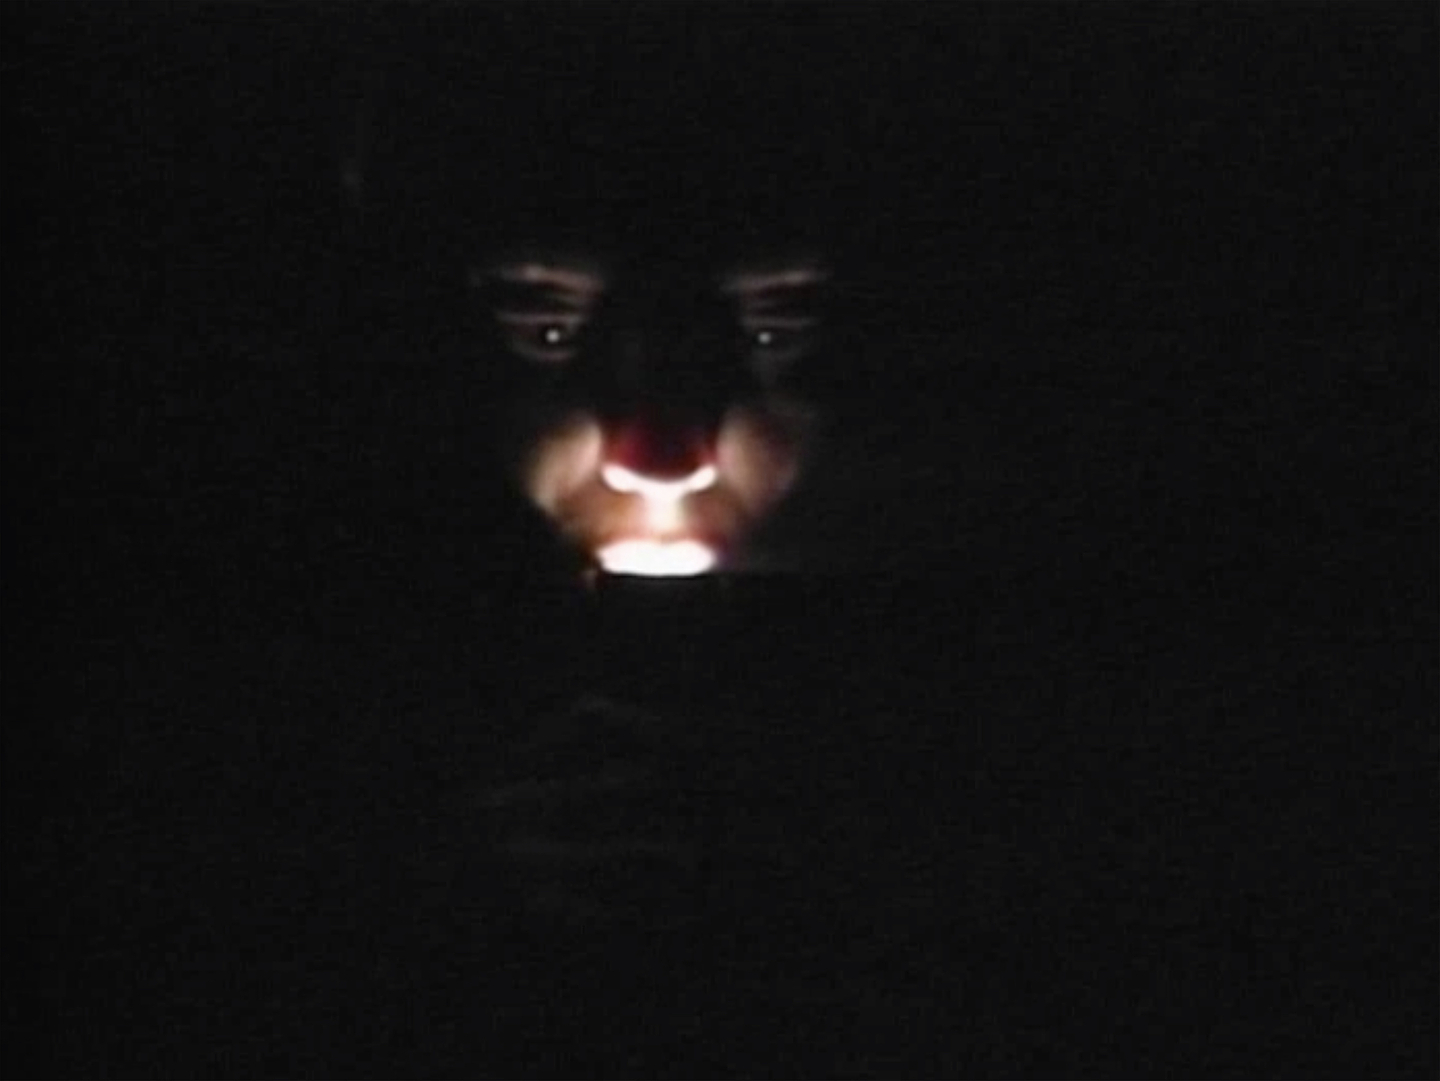 A ghostly image of a face illuminated from below by a flashlight.